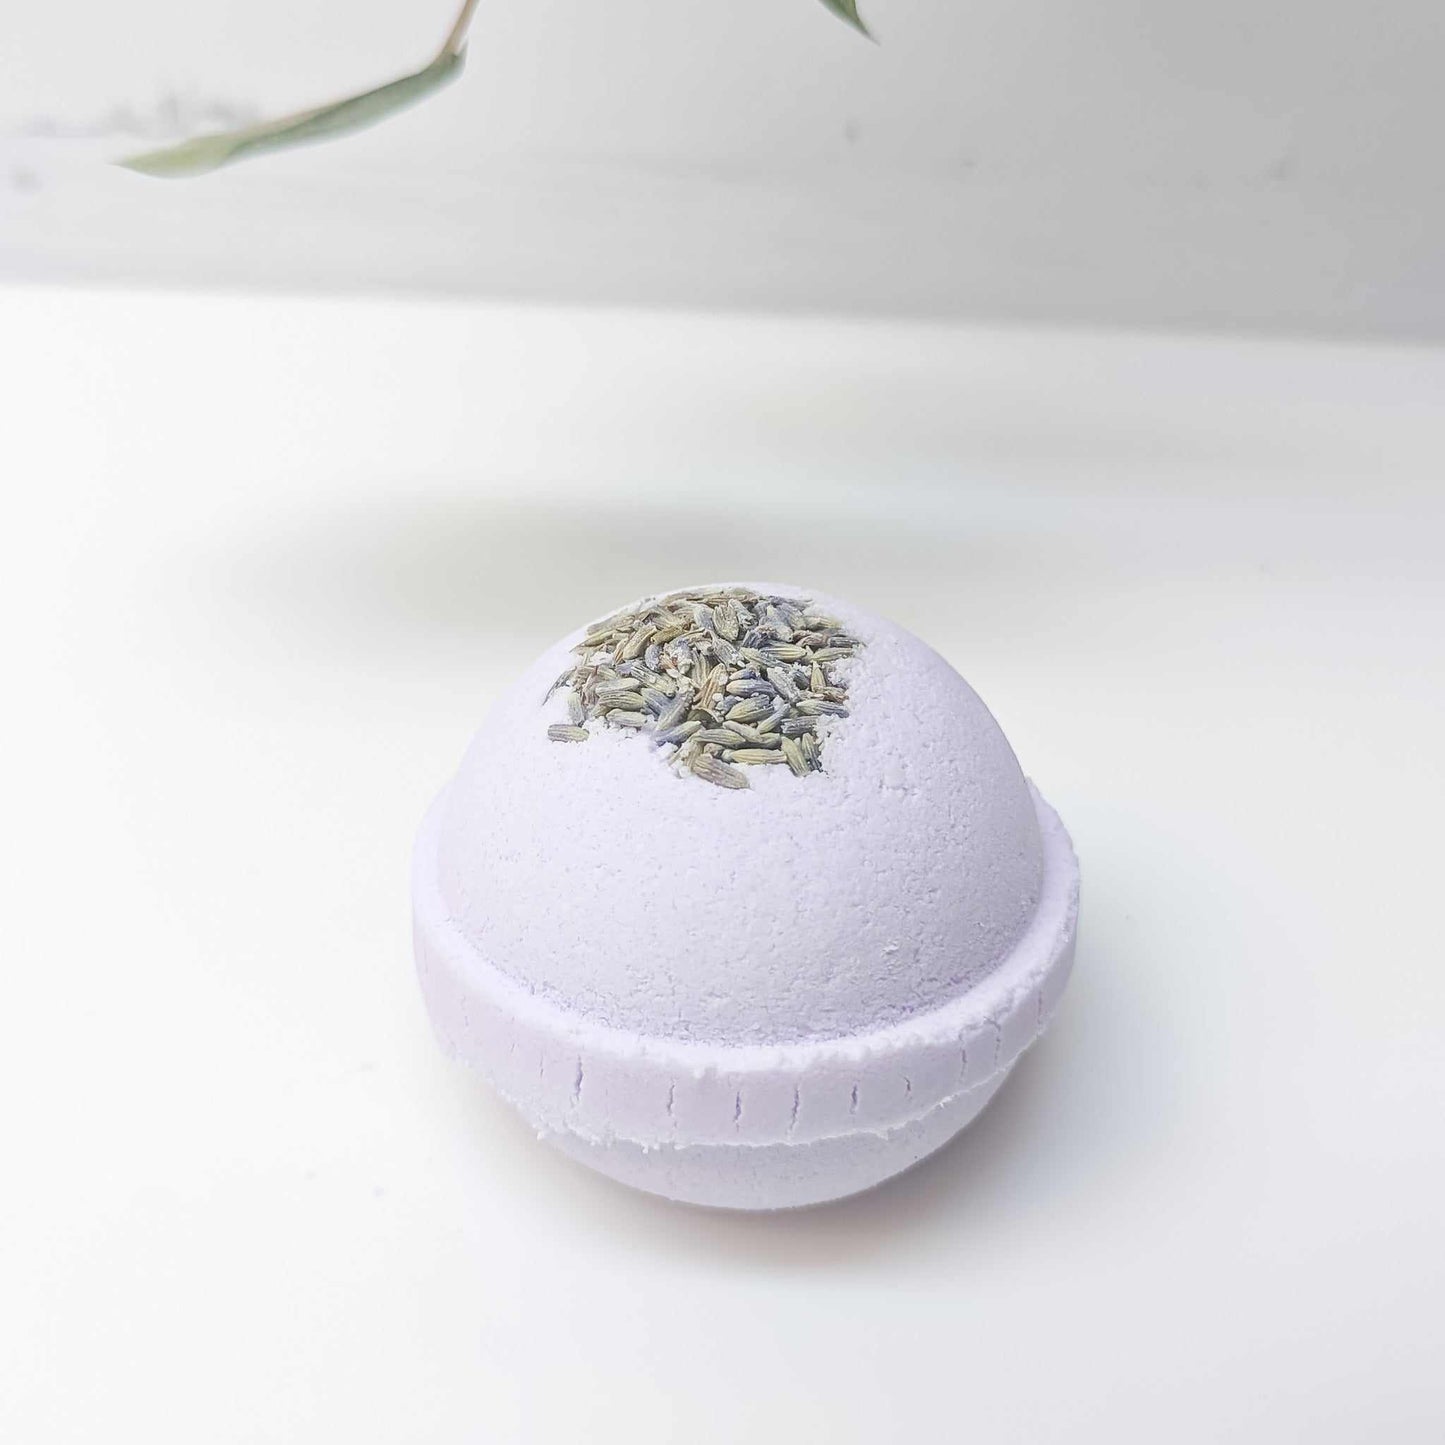 Soothing Lavender Bath Bomb with floating lavender buds | CG Pure Wash